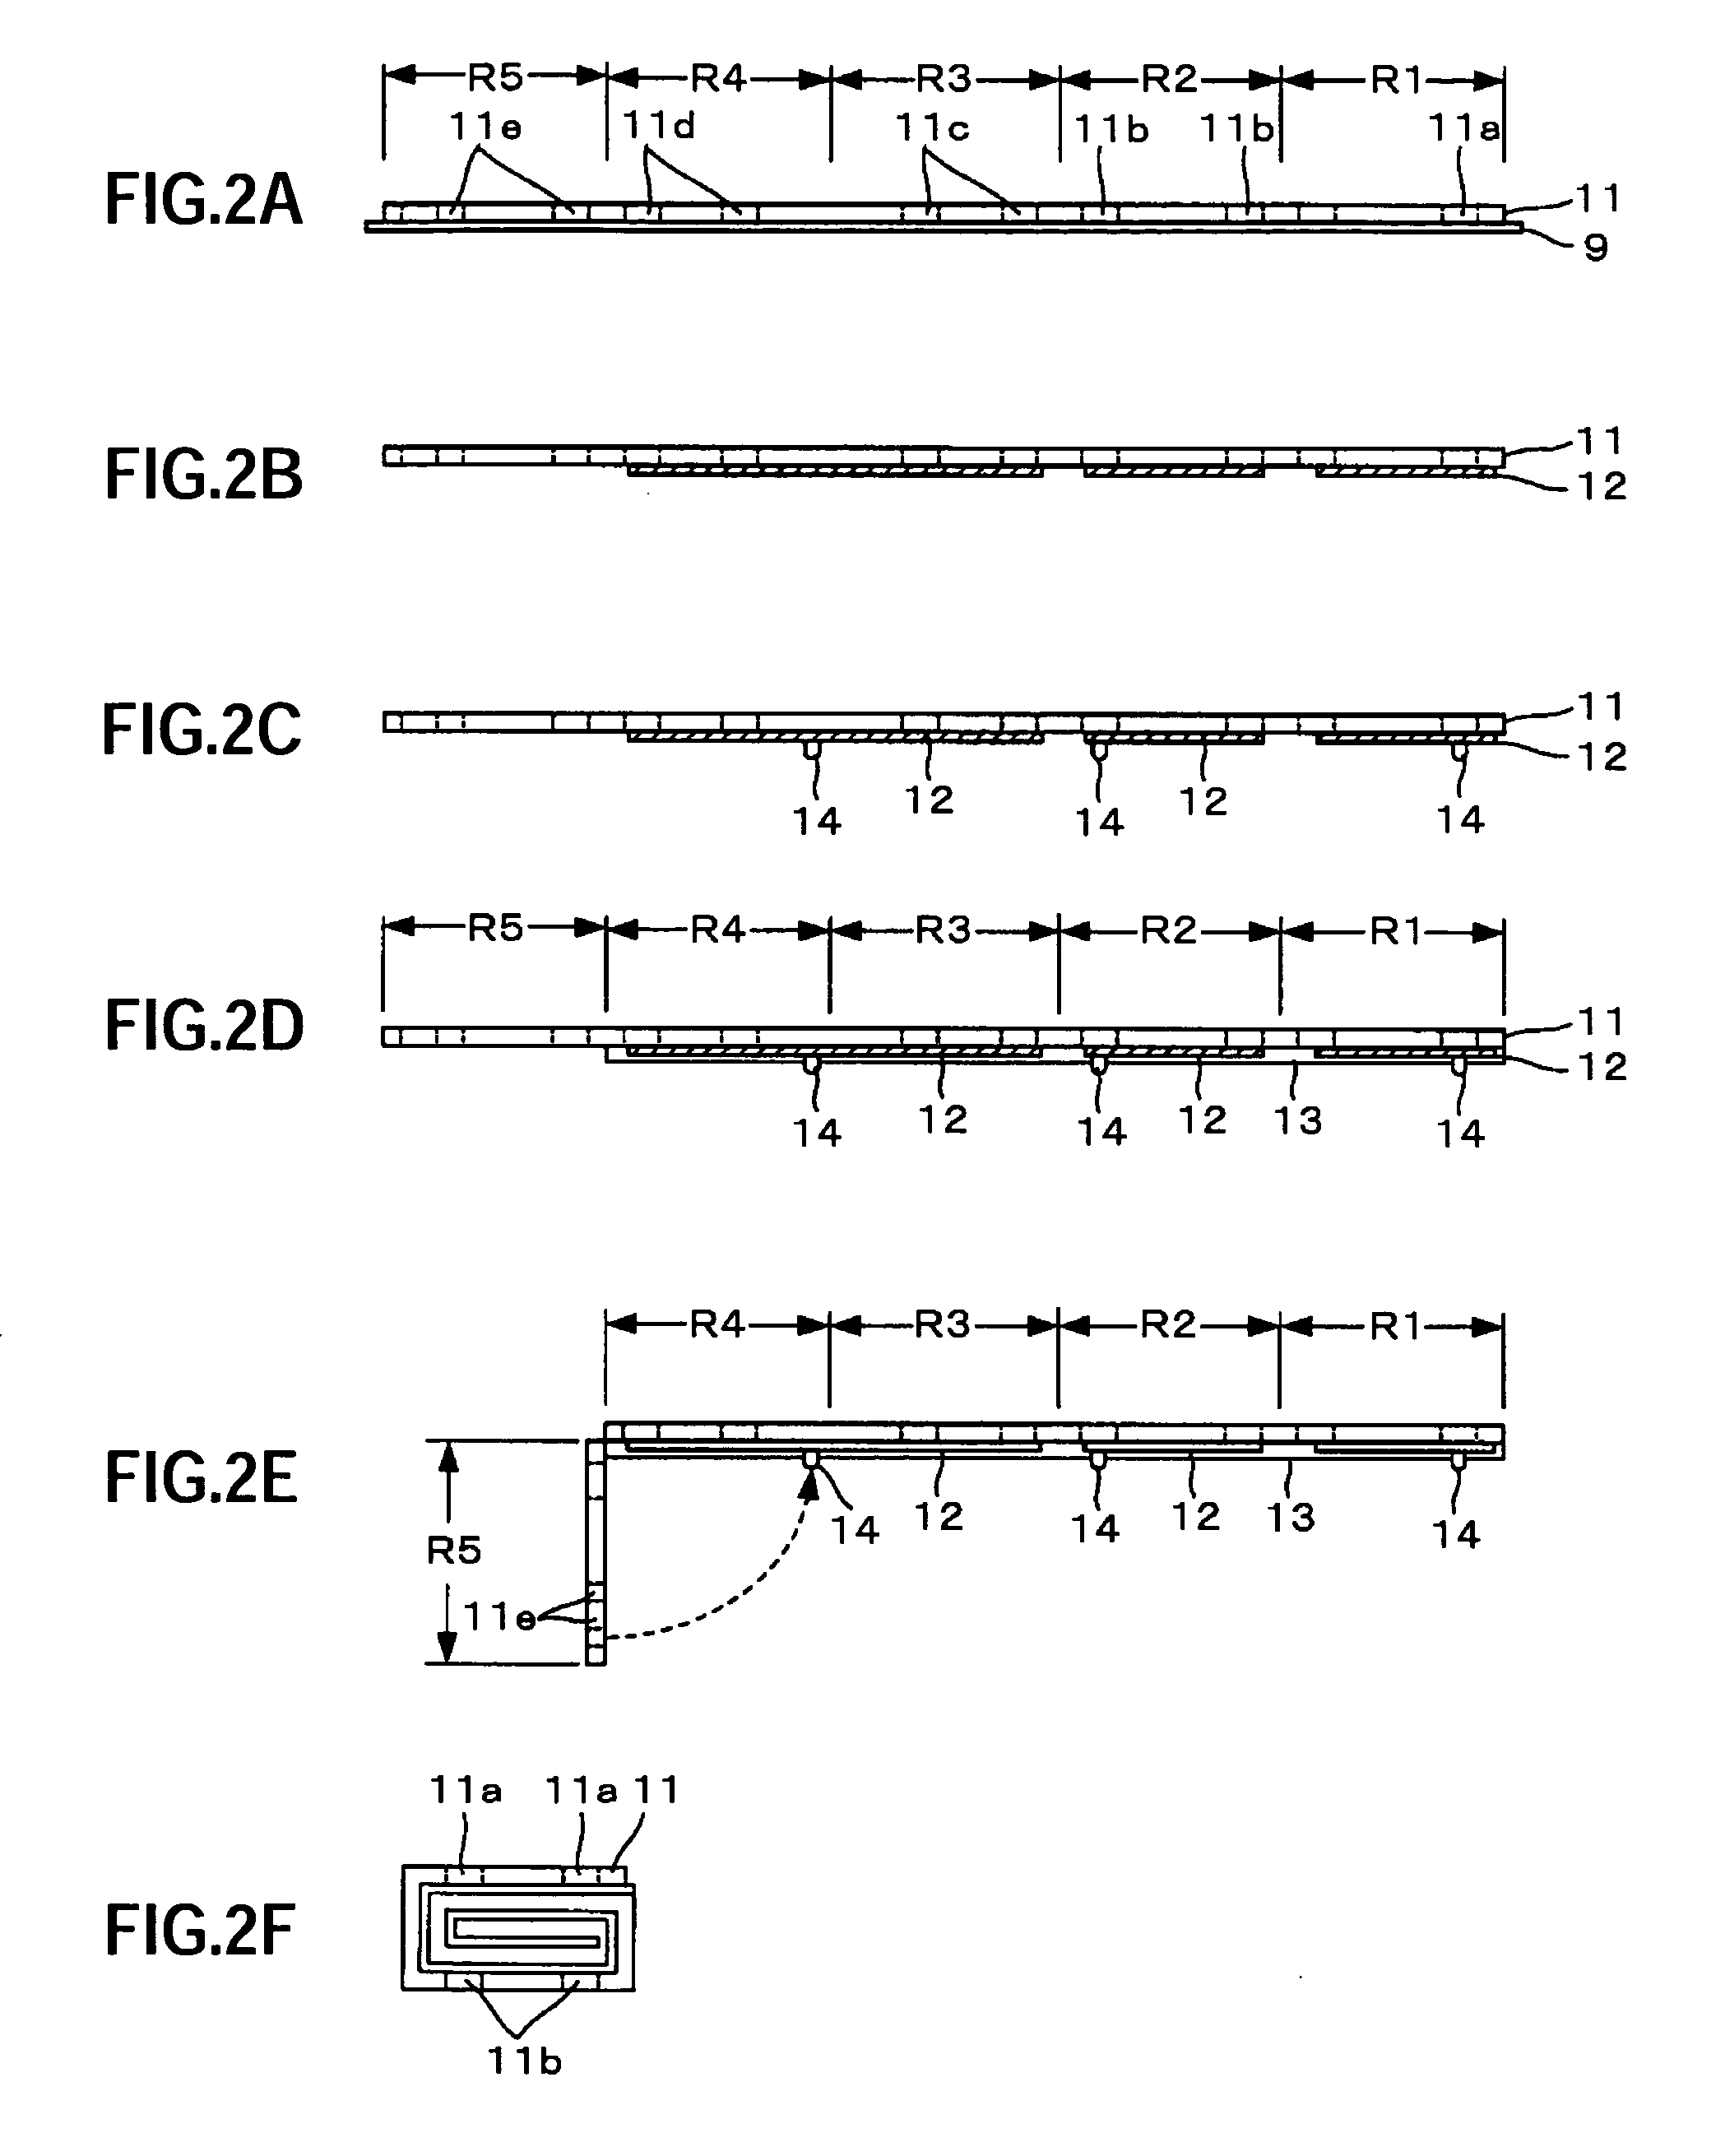 Multilayer wiring board and process for fabricating a multilayer wiring board